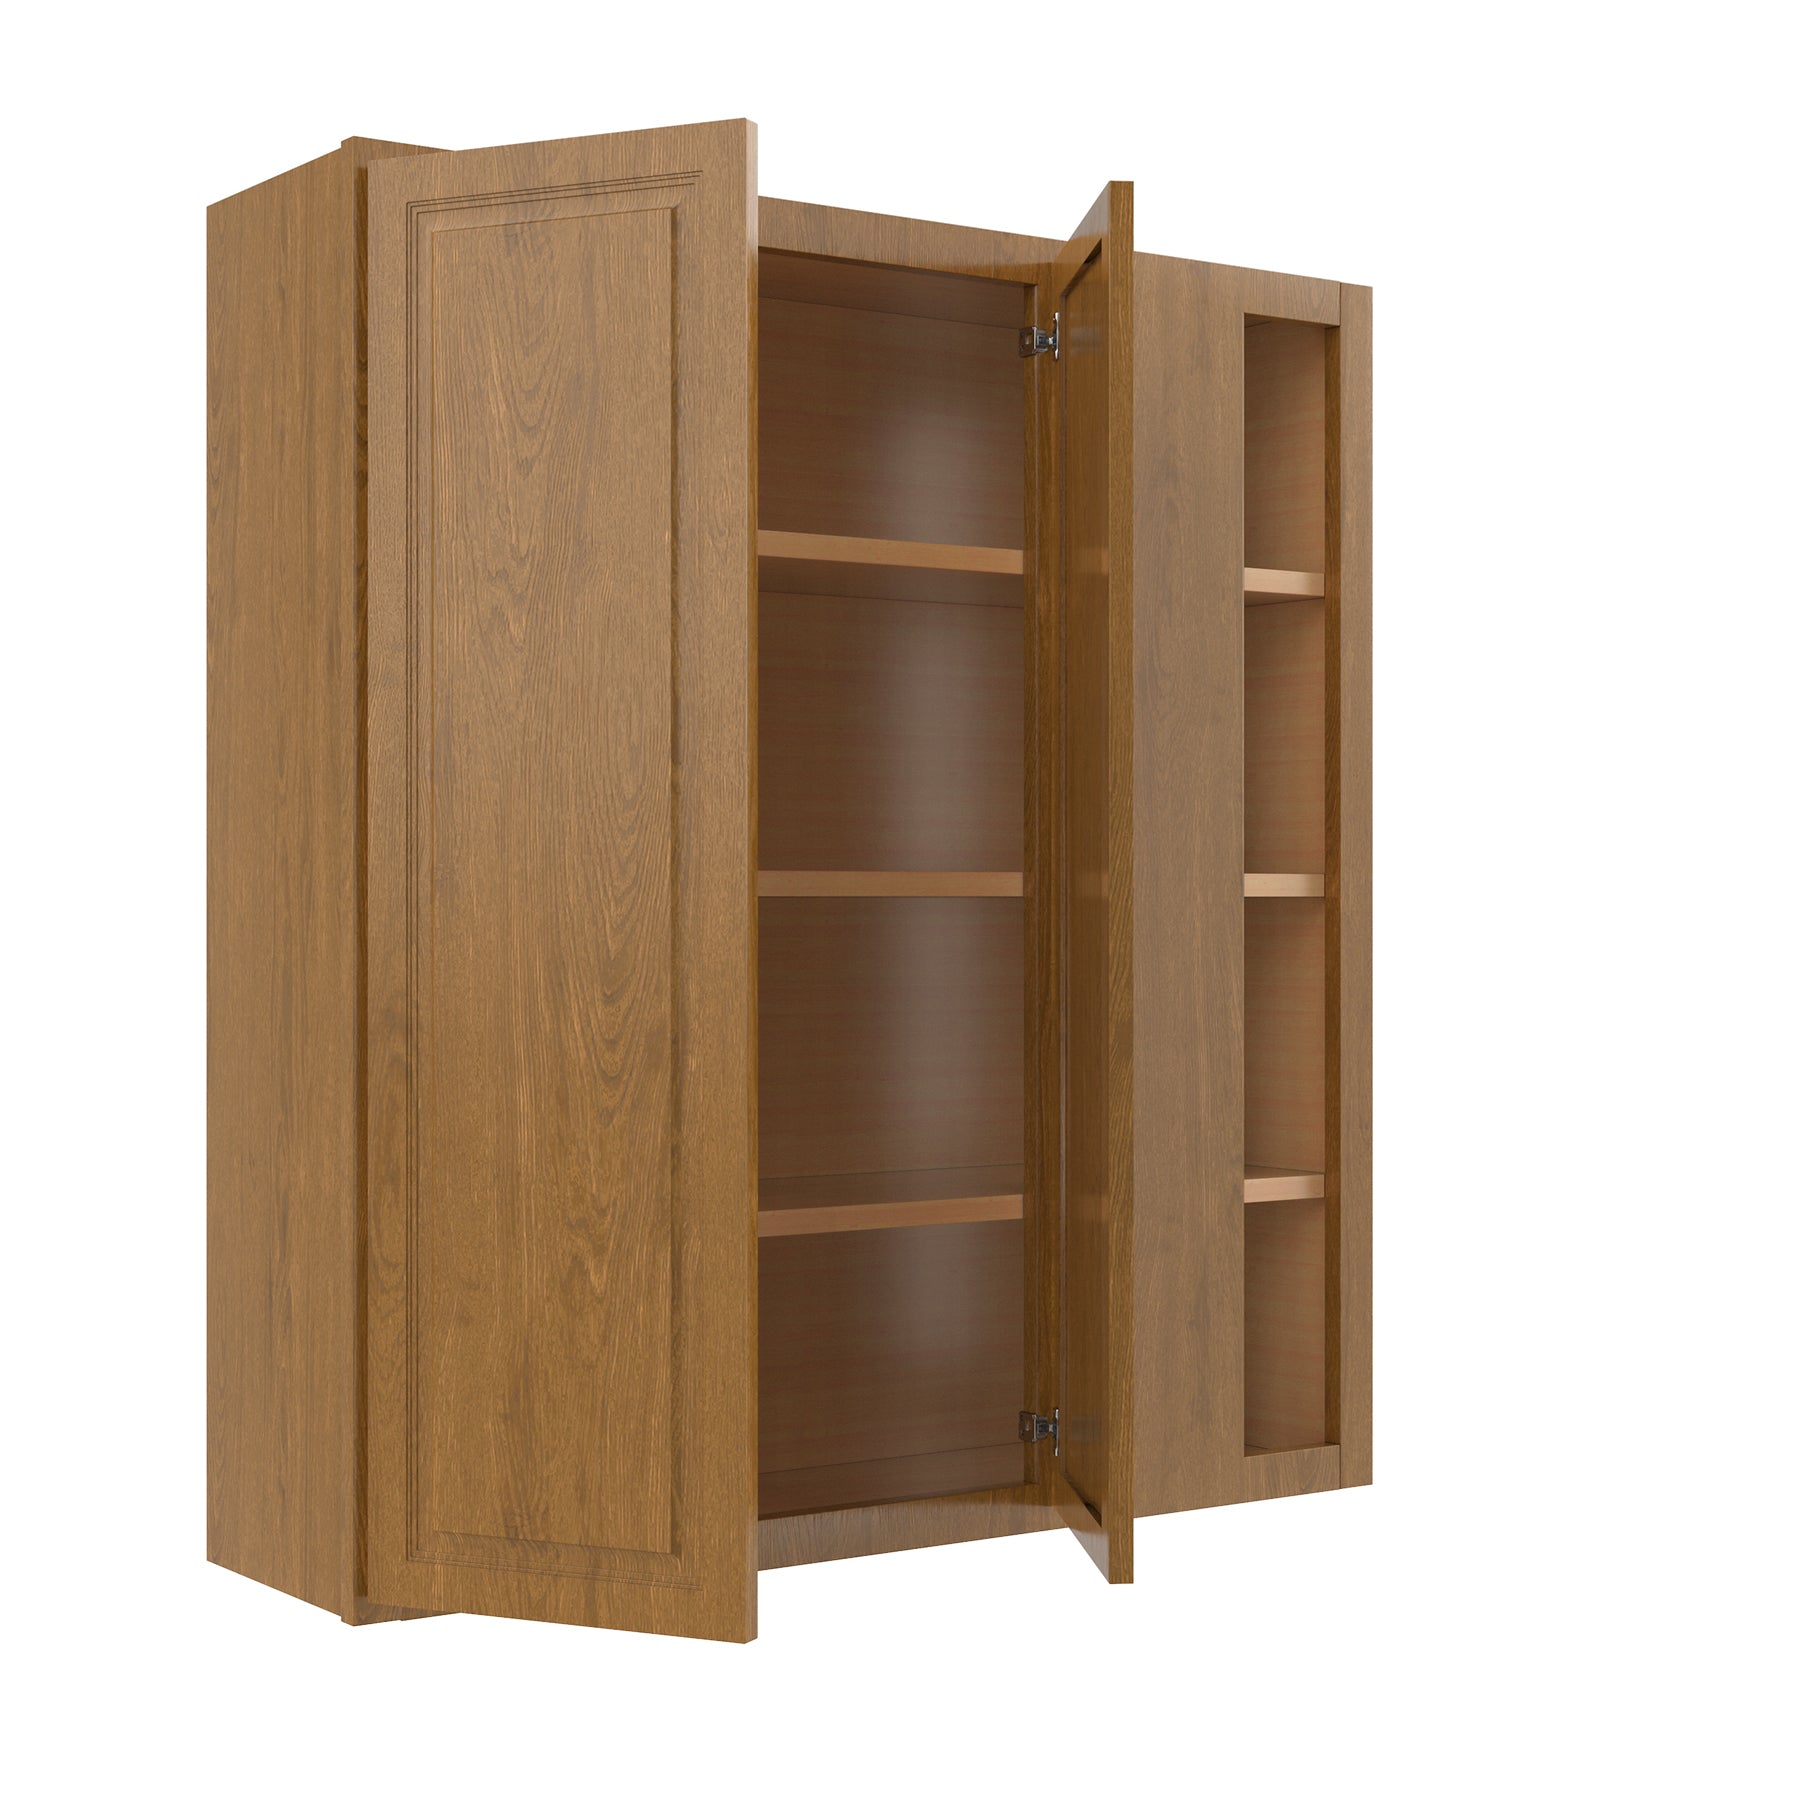 Country Oak 39"W x 42"H Blind Wall Cabinet